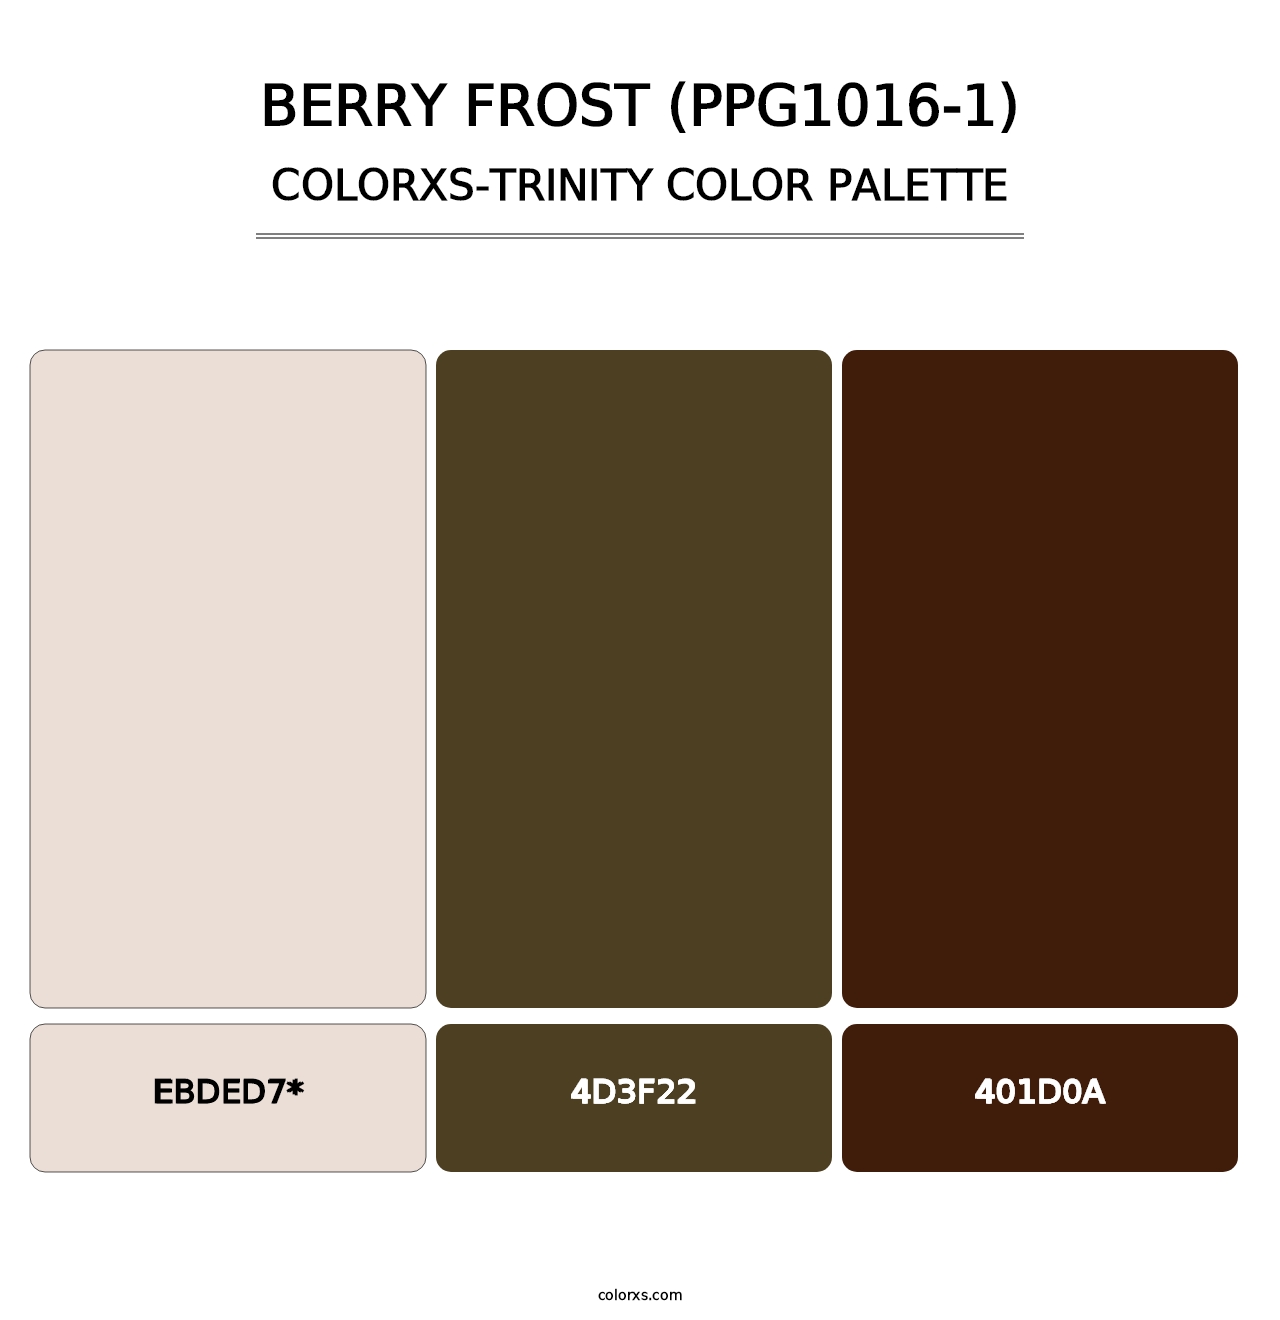 Berry Frost (PPG1016-1) - Colorxs Trinity Palette